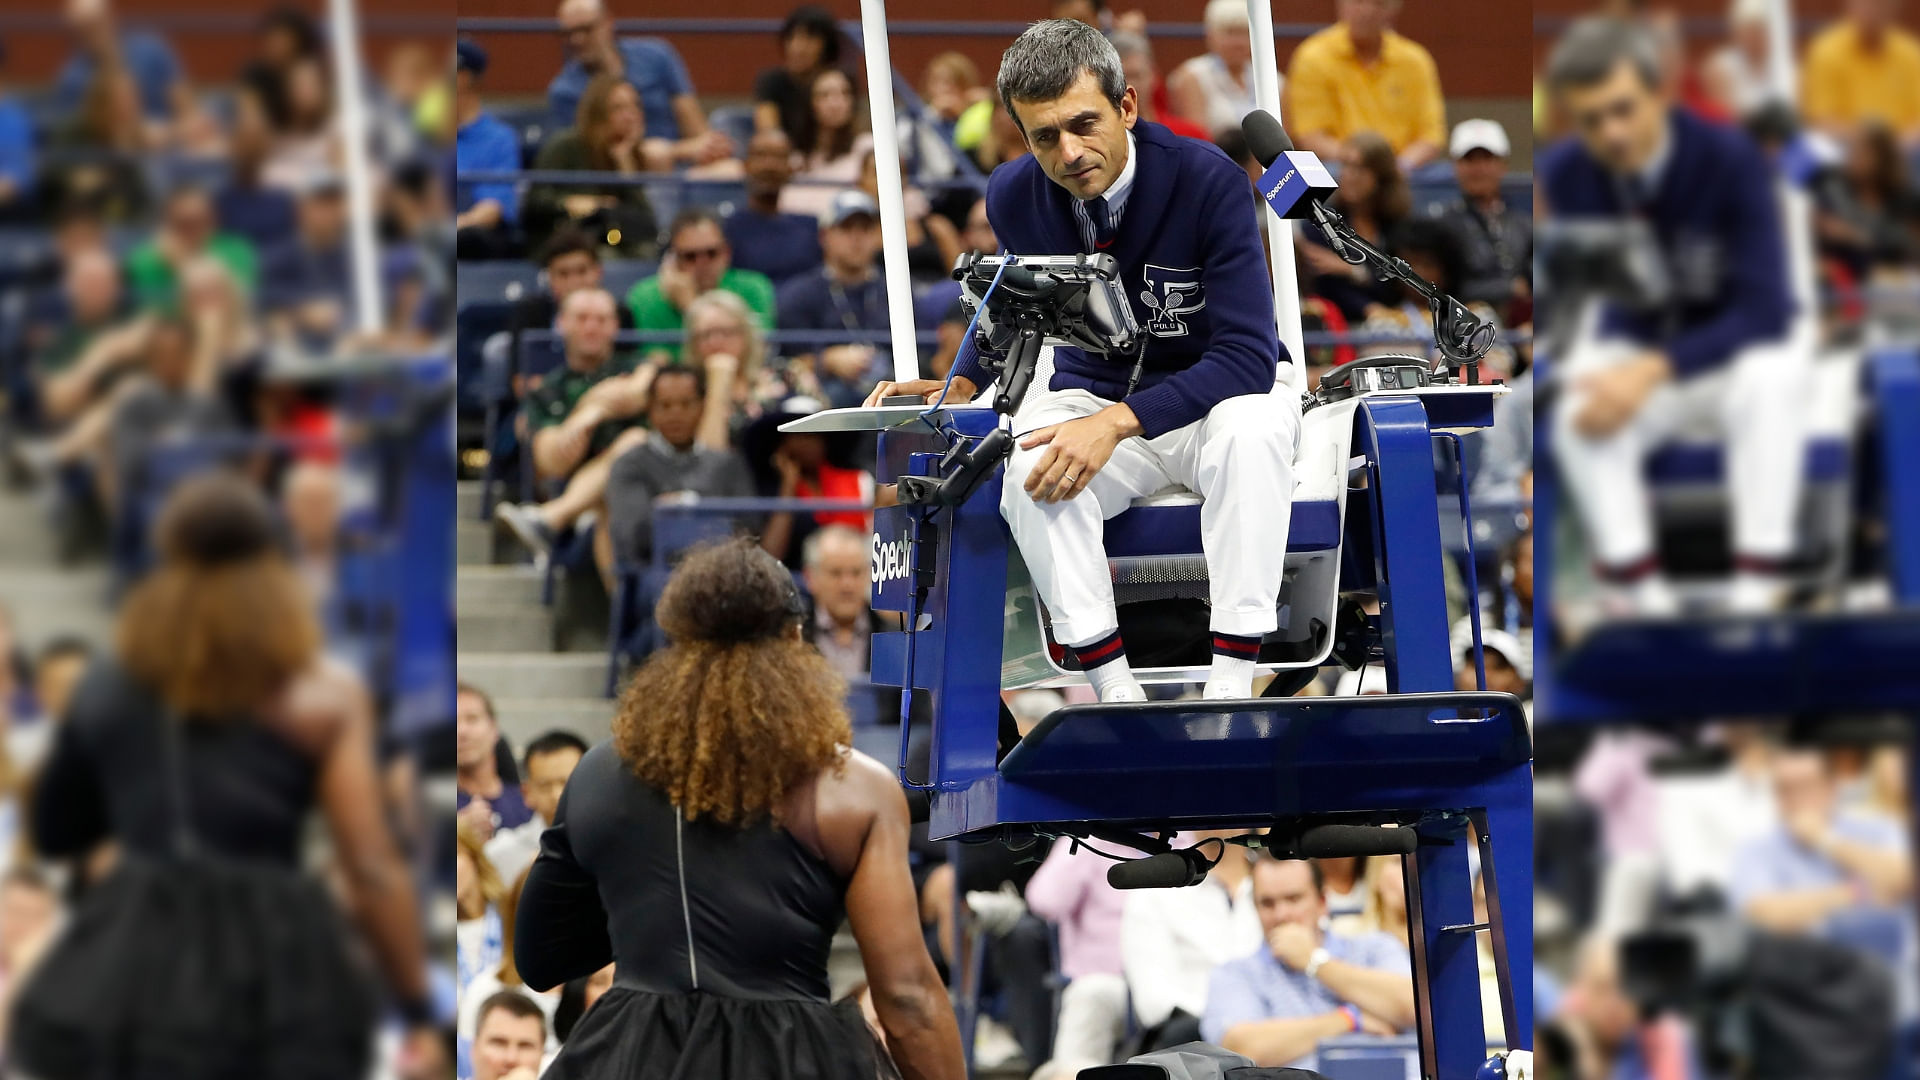 Chair umpire Carlos Ramos talks with Serena Williams during the women’s final of the US Open tennis tournament against Naomi Osaka.